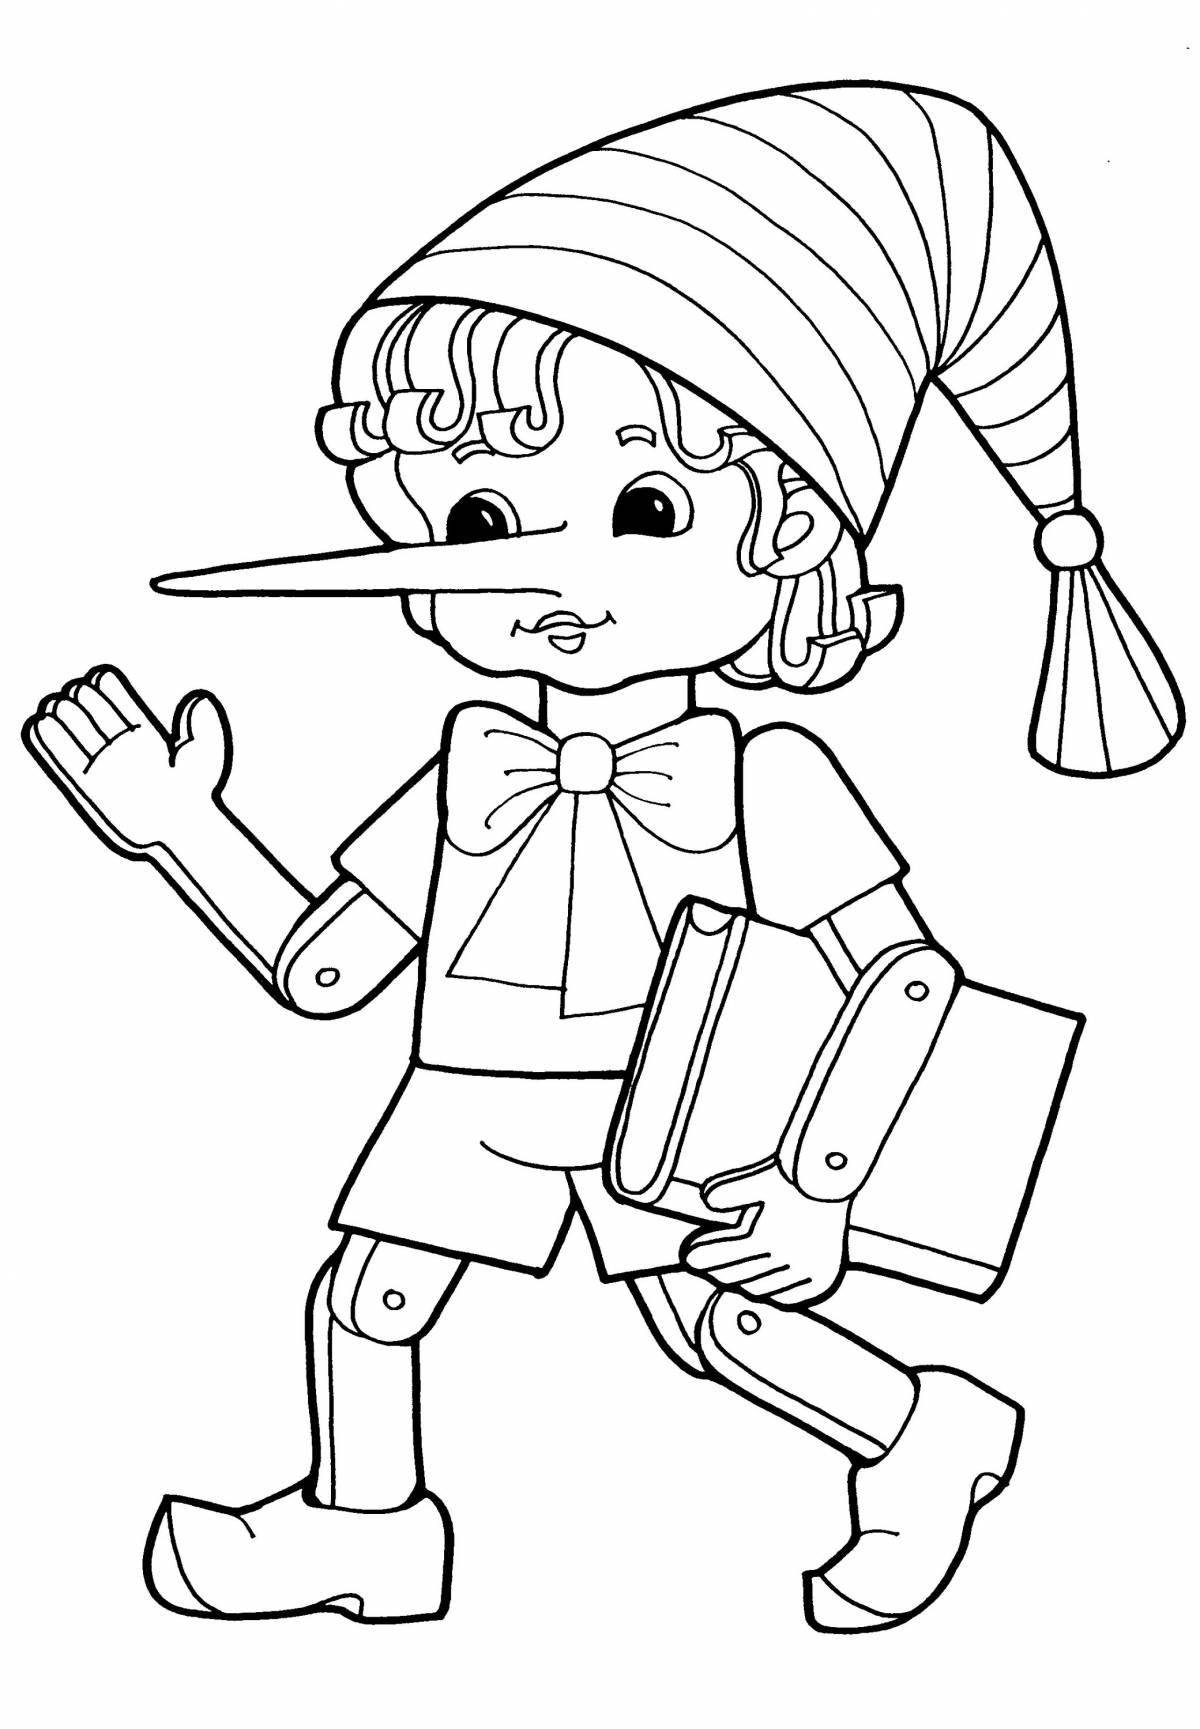 Adorable fairy tale character coloring book for kids